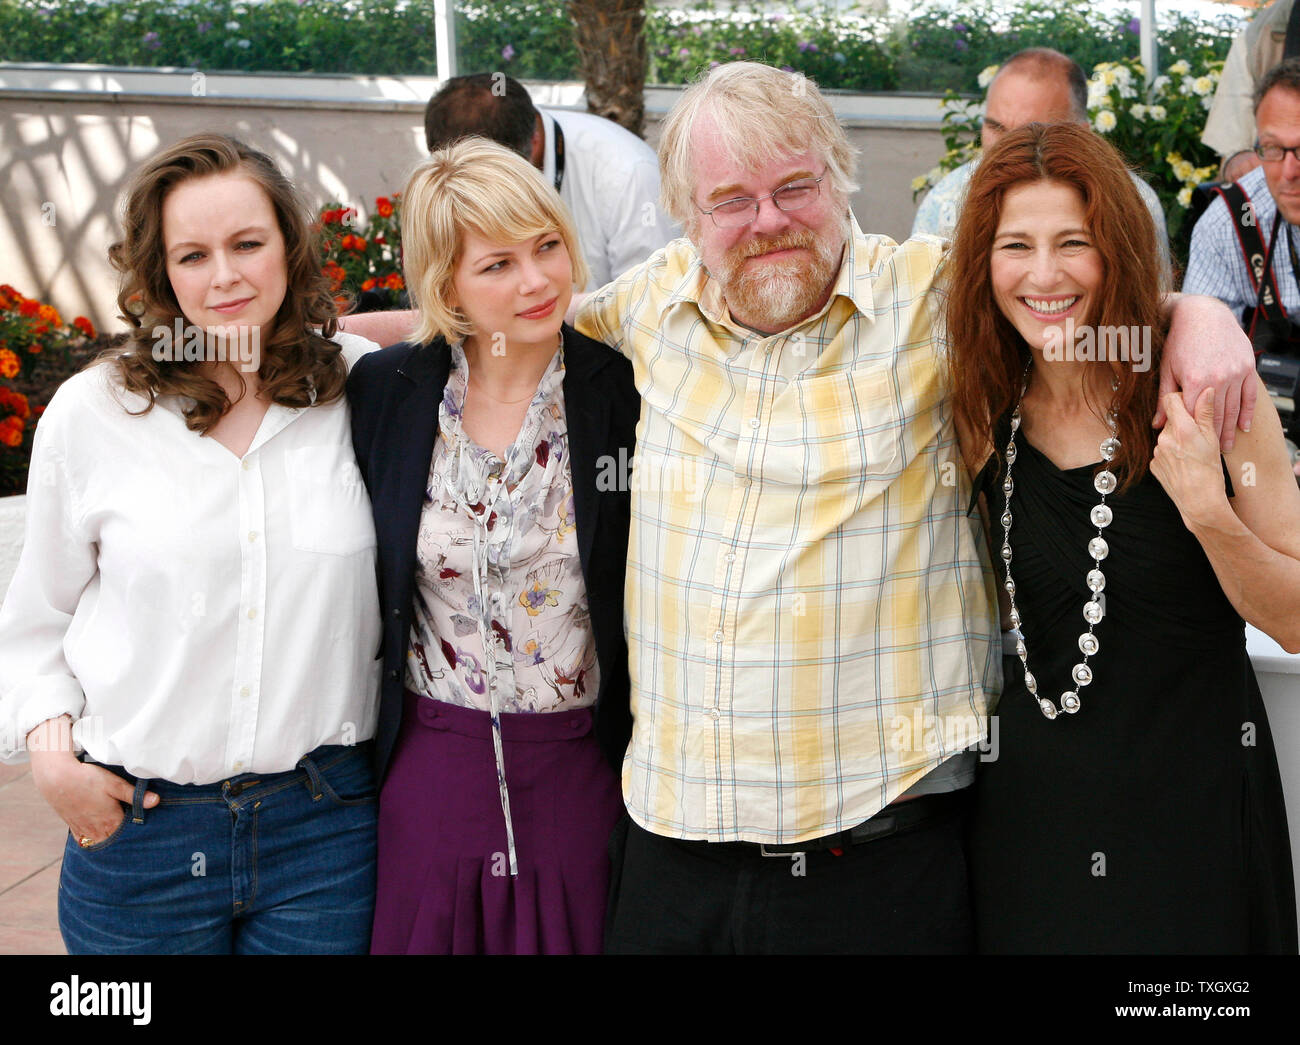 (From L to R) Actresses Samantha Morton, Michelle Williams, actor Philip Seymour Hoffman and actress Catherine Keener arrive at a photocall for the film 'Synecdoche, New York' during the 61st Annual Cannes Film Festival in Cannes, France on May 23, 2008.   (UPI Photo/David Silpa) Stock Photo